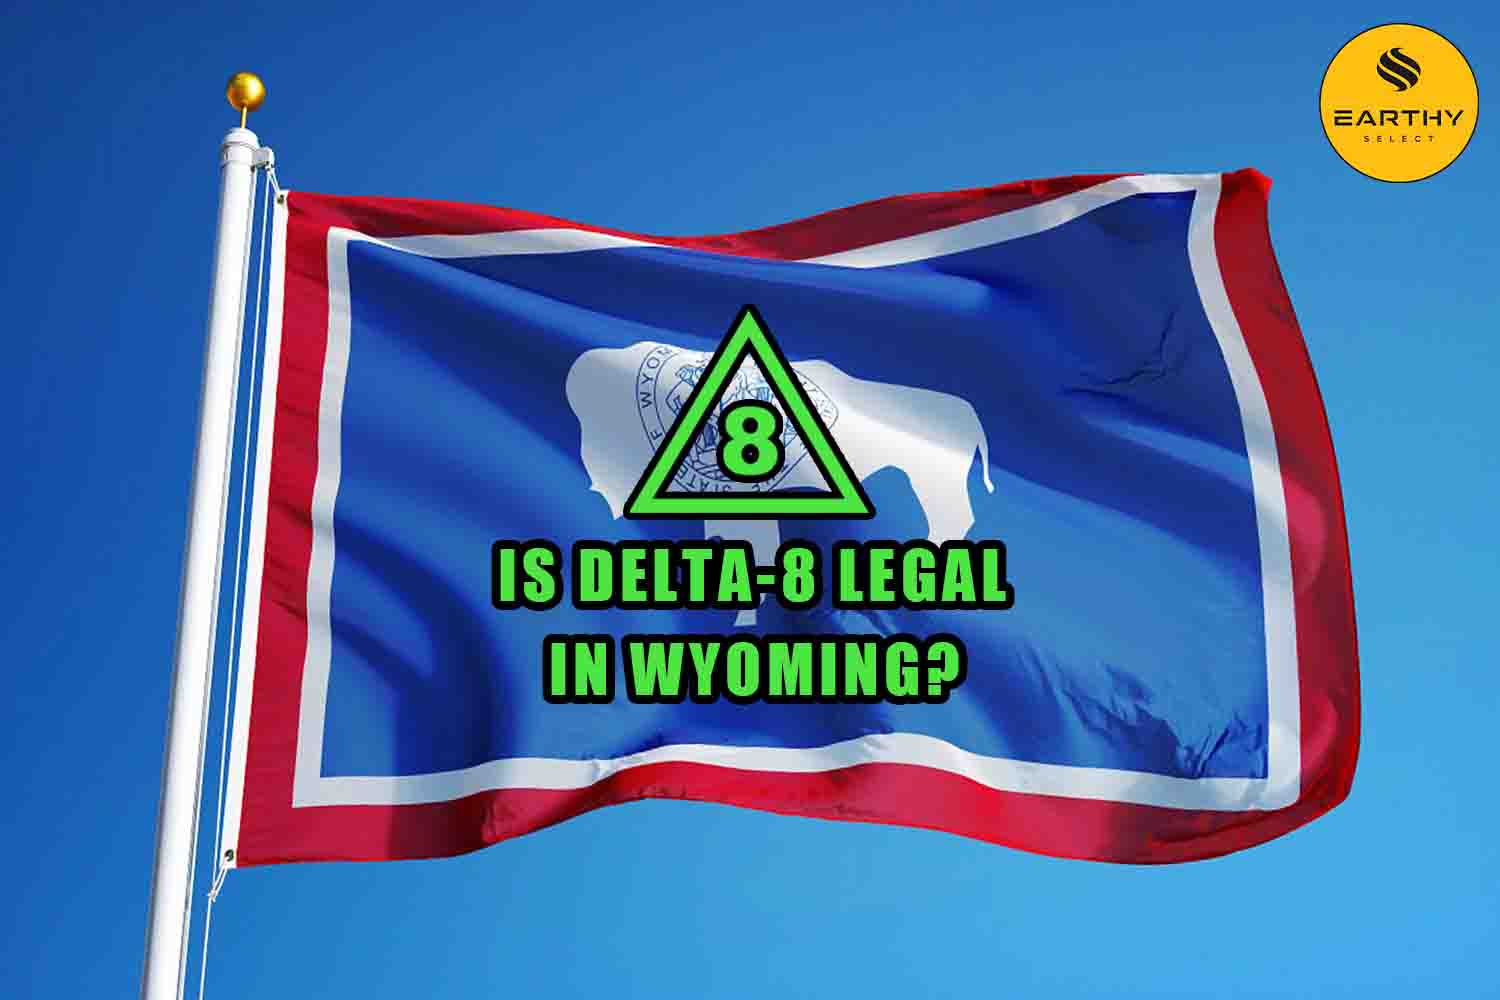 Is Delta-8 legal in Wyoming? On Wyoming state flag, Earthy Select logo